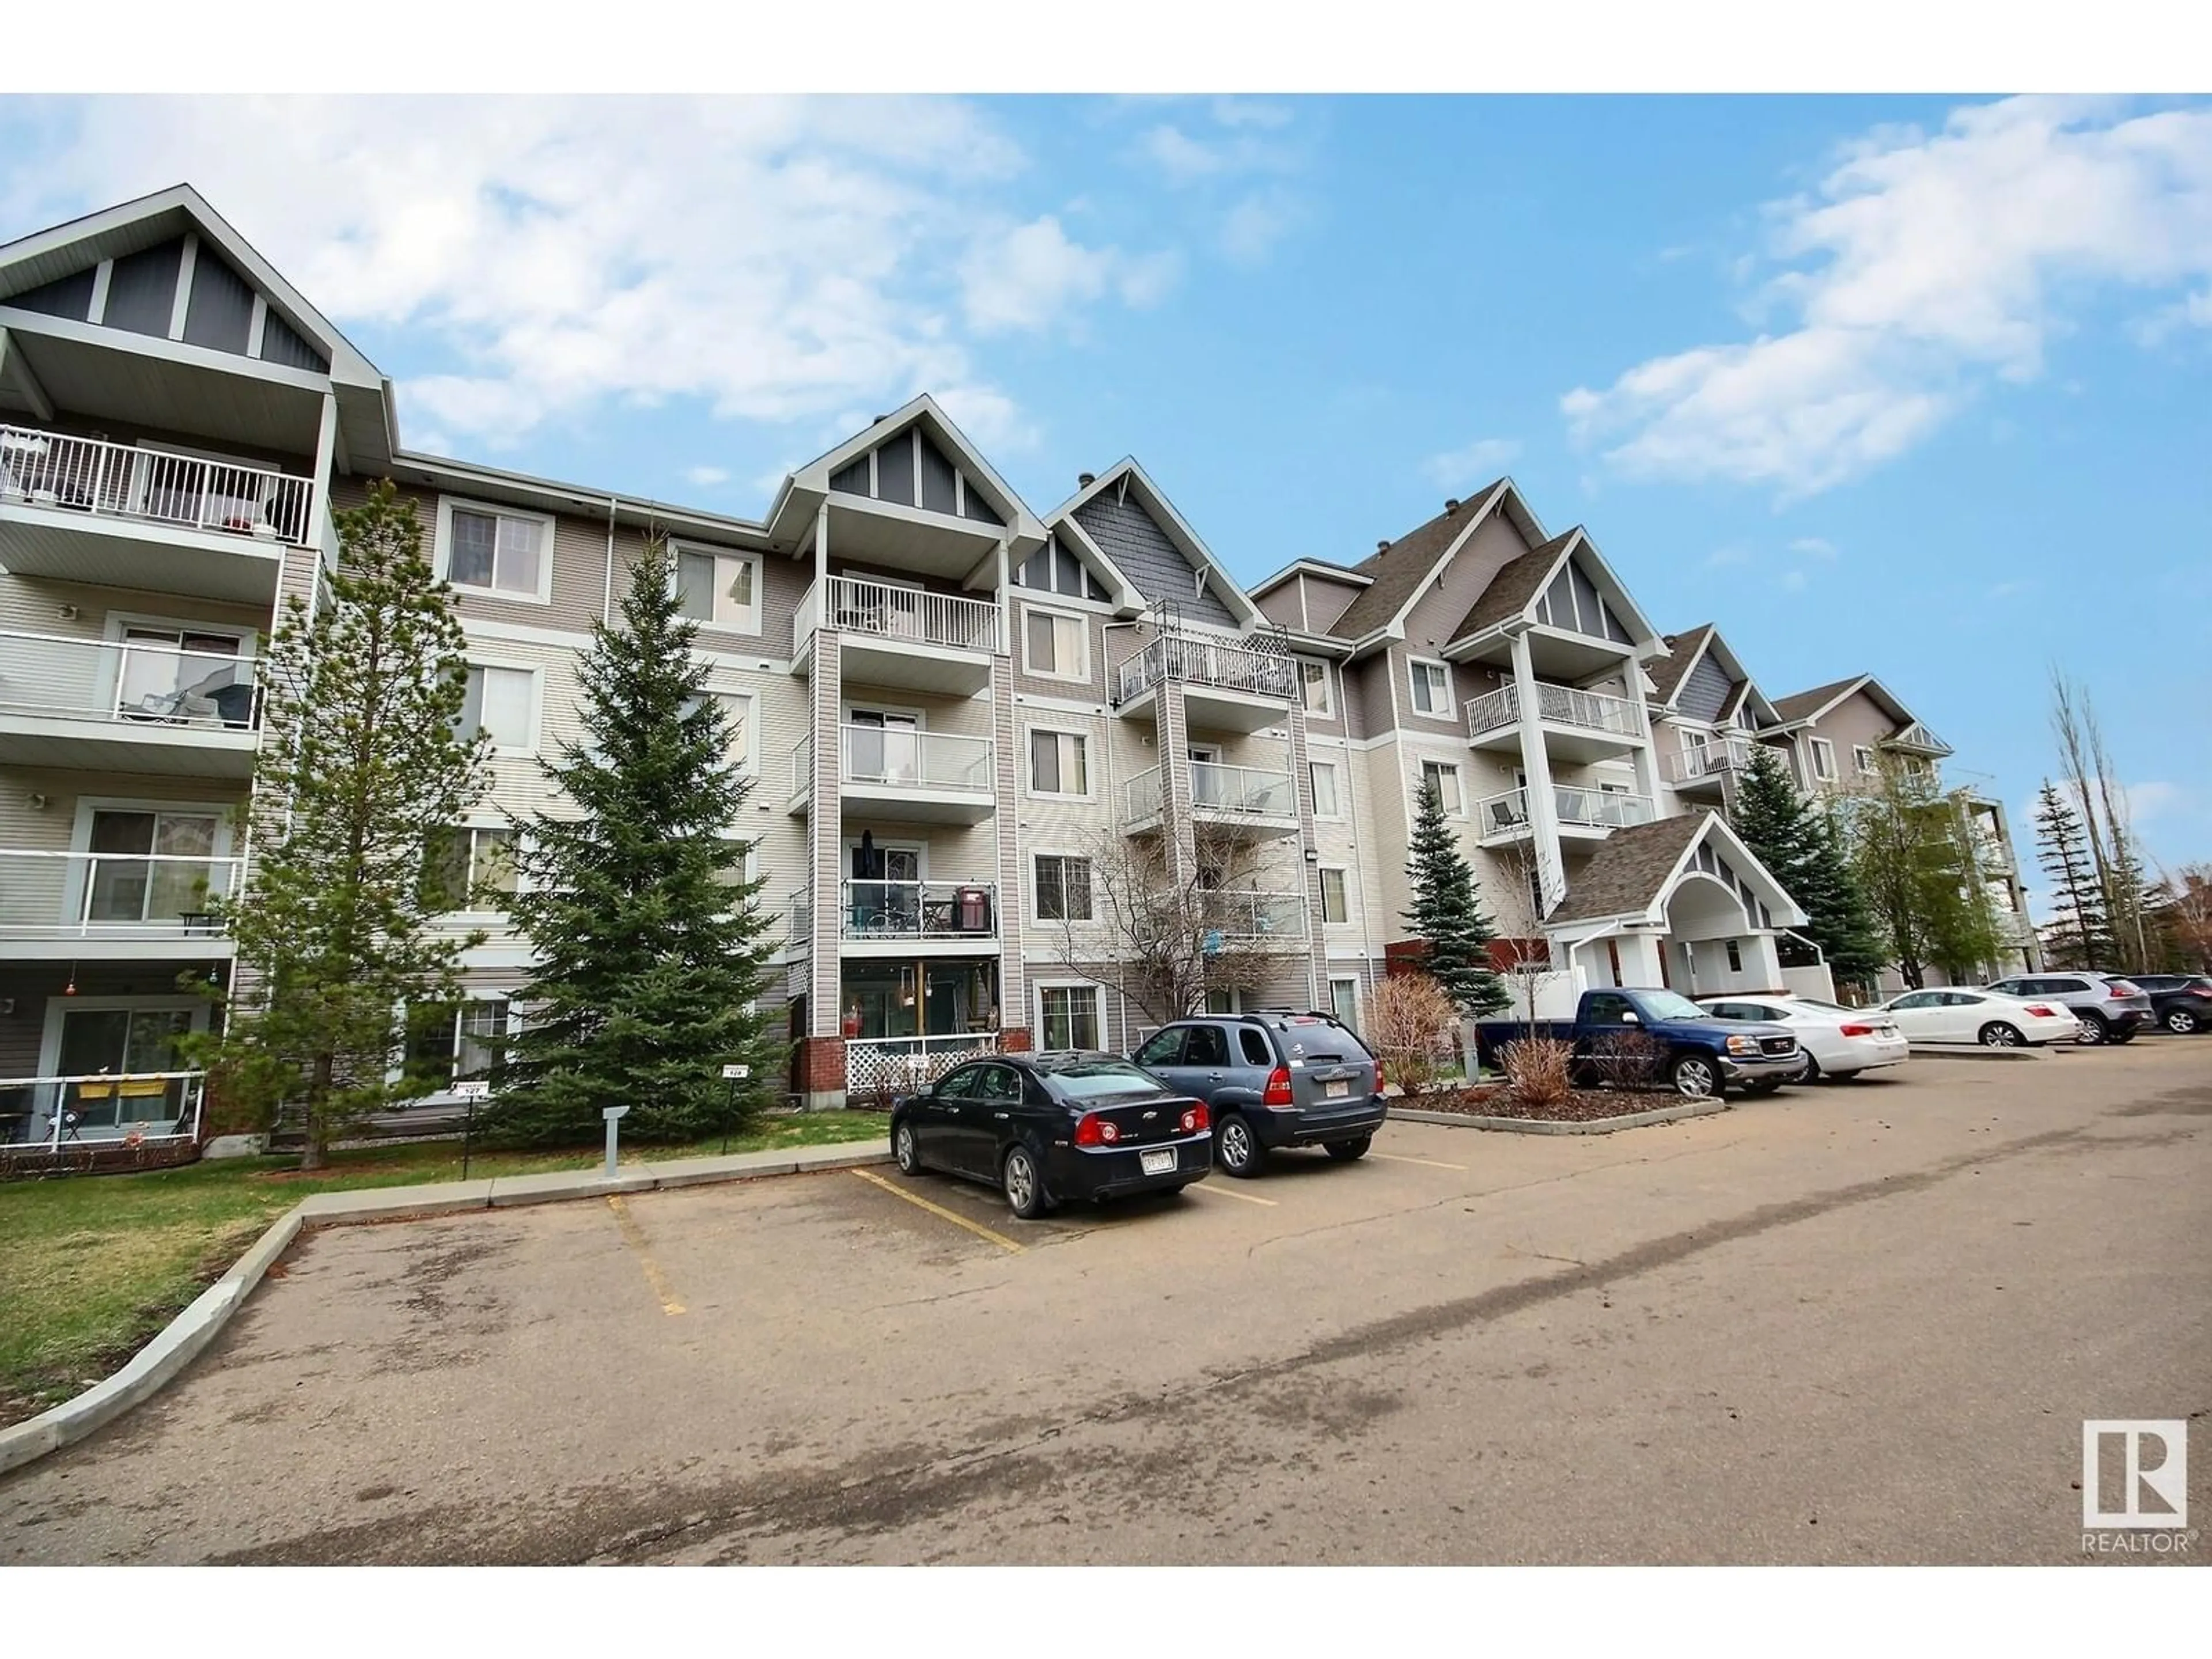 A pic from exterior of the house or condo for #114 13710 150 AV NW, Edmonton Alberta T6V0B2